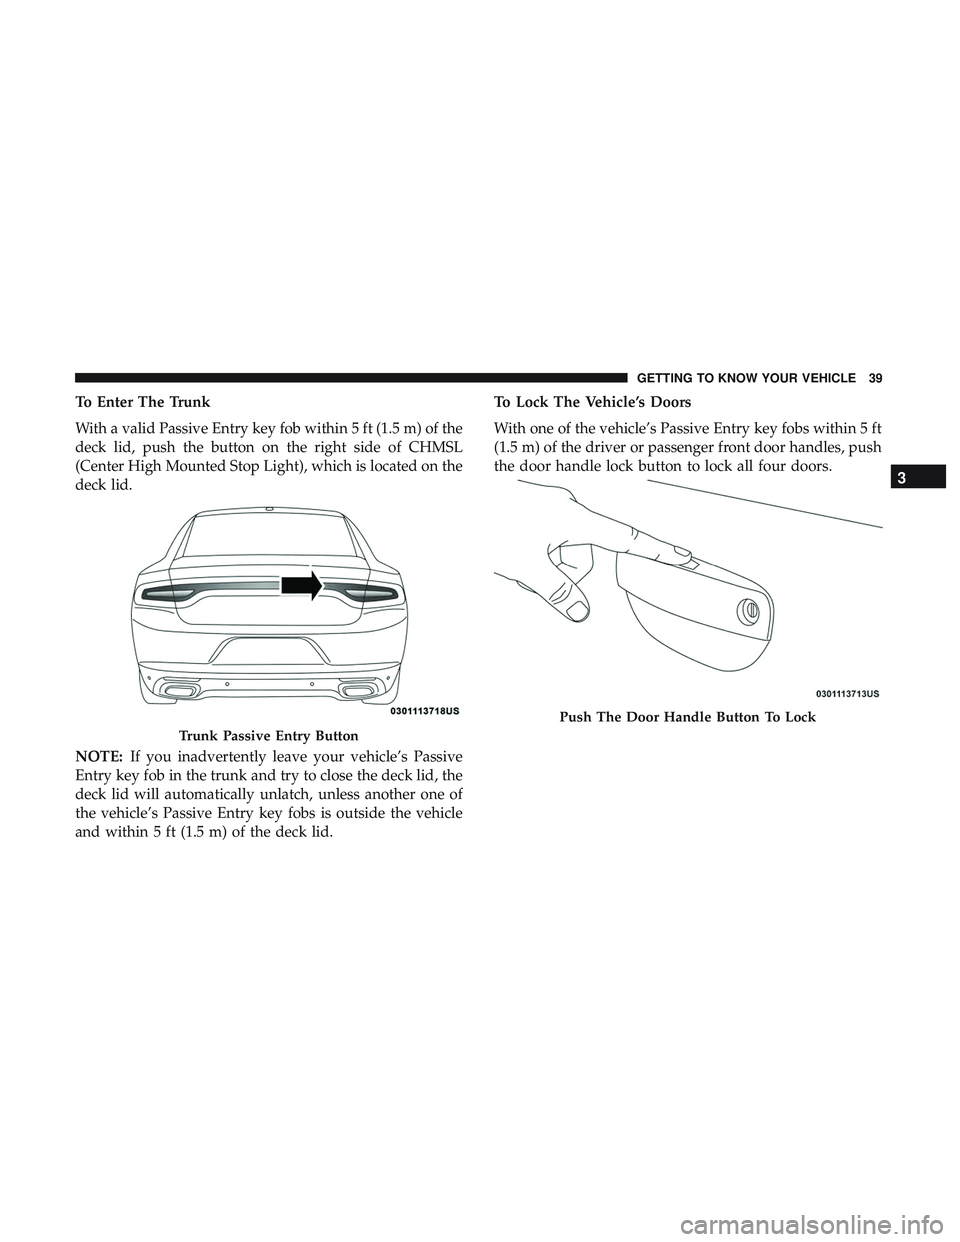 DODGE CHARGER SRT 2018 Service Manual To Enter The Trunk
With a valid Passive Entry key fob within 5 ft (1.5 m) of the
deck lid, push the button on the right side of CHMSL
(Center High Mounted Stop Light), which is located on the
deck lid